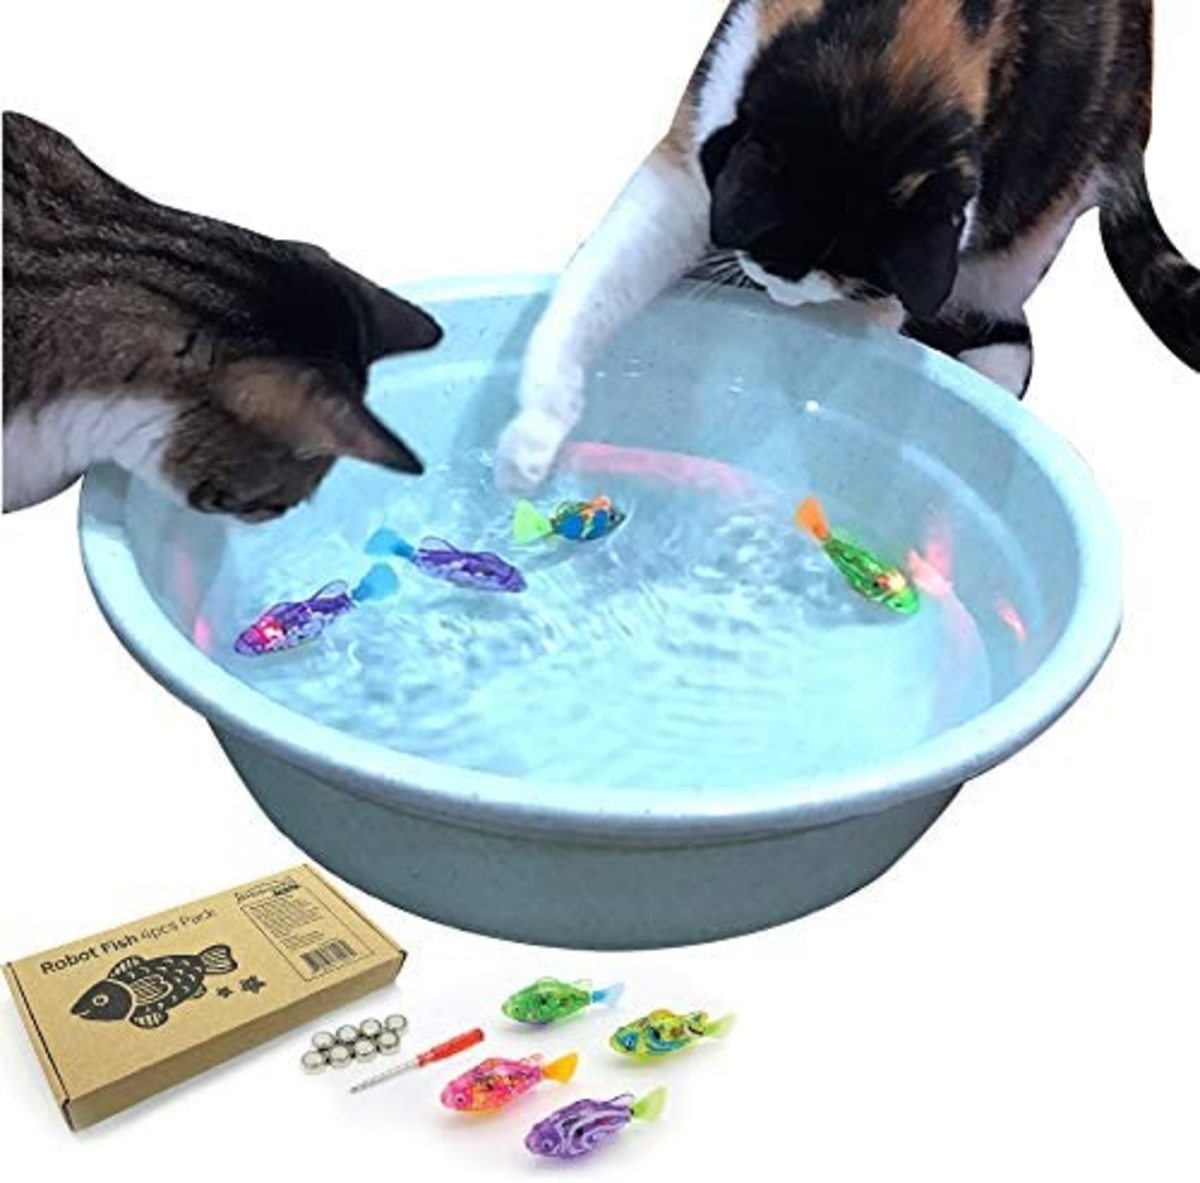 These are robot fish that can swim.  Your cat may make a mess with the water you supply in a basin of your own.  The basin does NOT come with the fish.